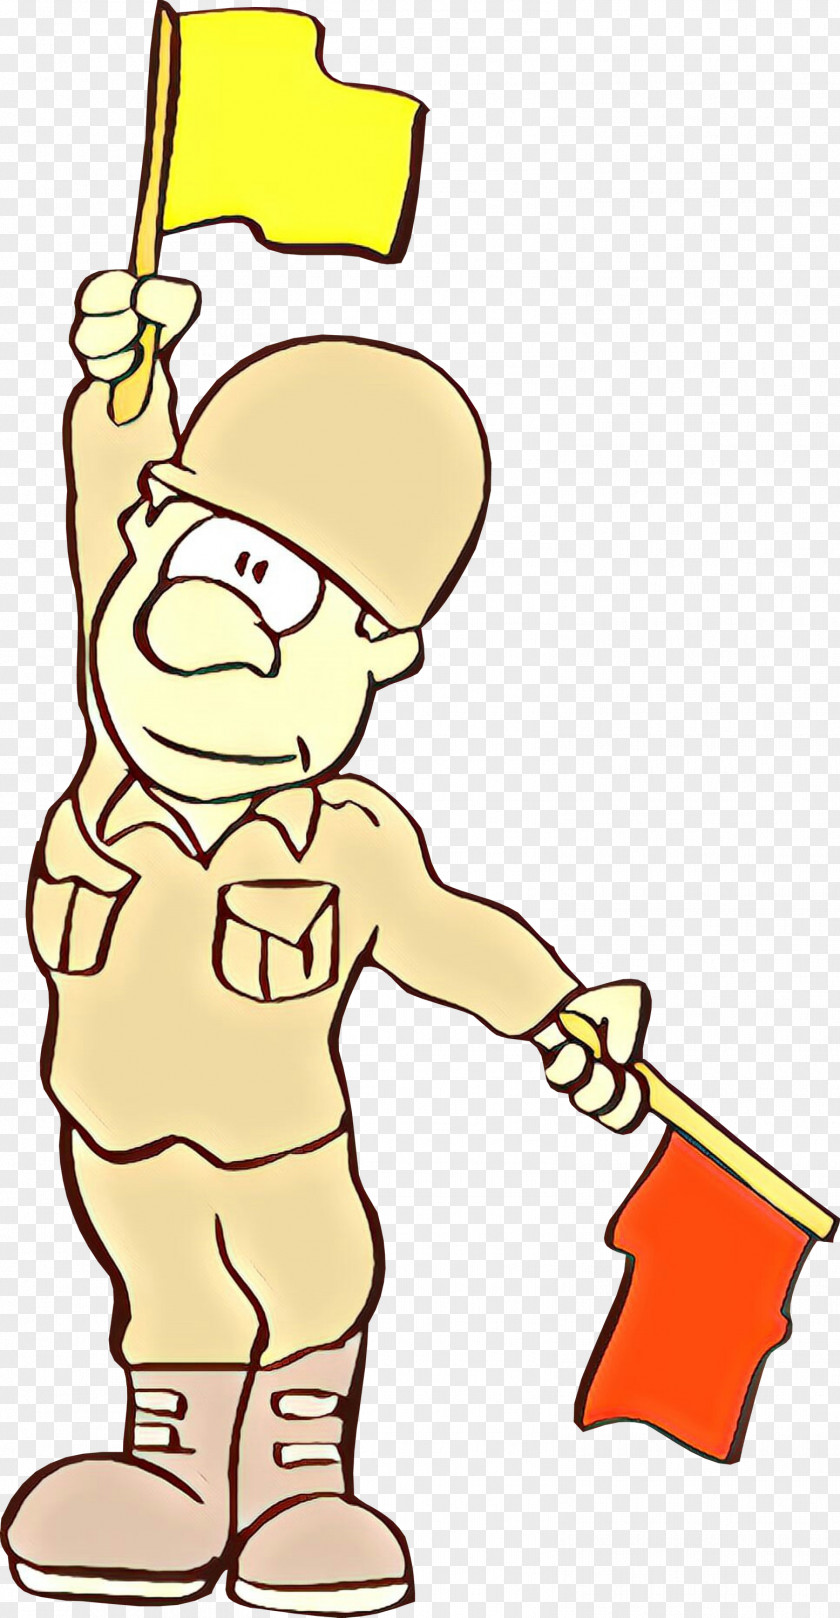 Clip Art Soldier Military Cartoon PNG